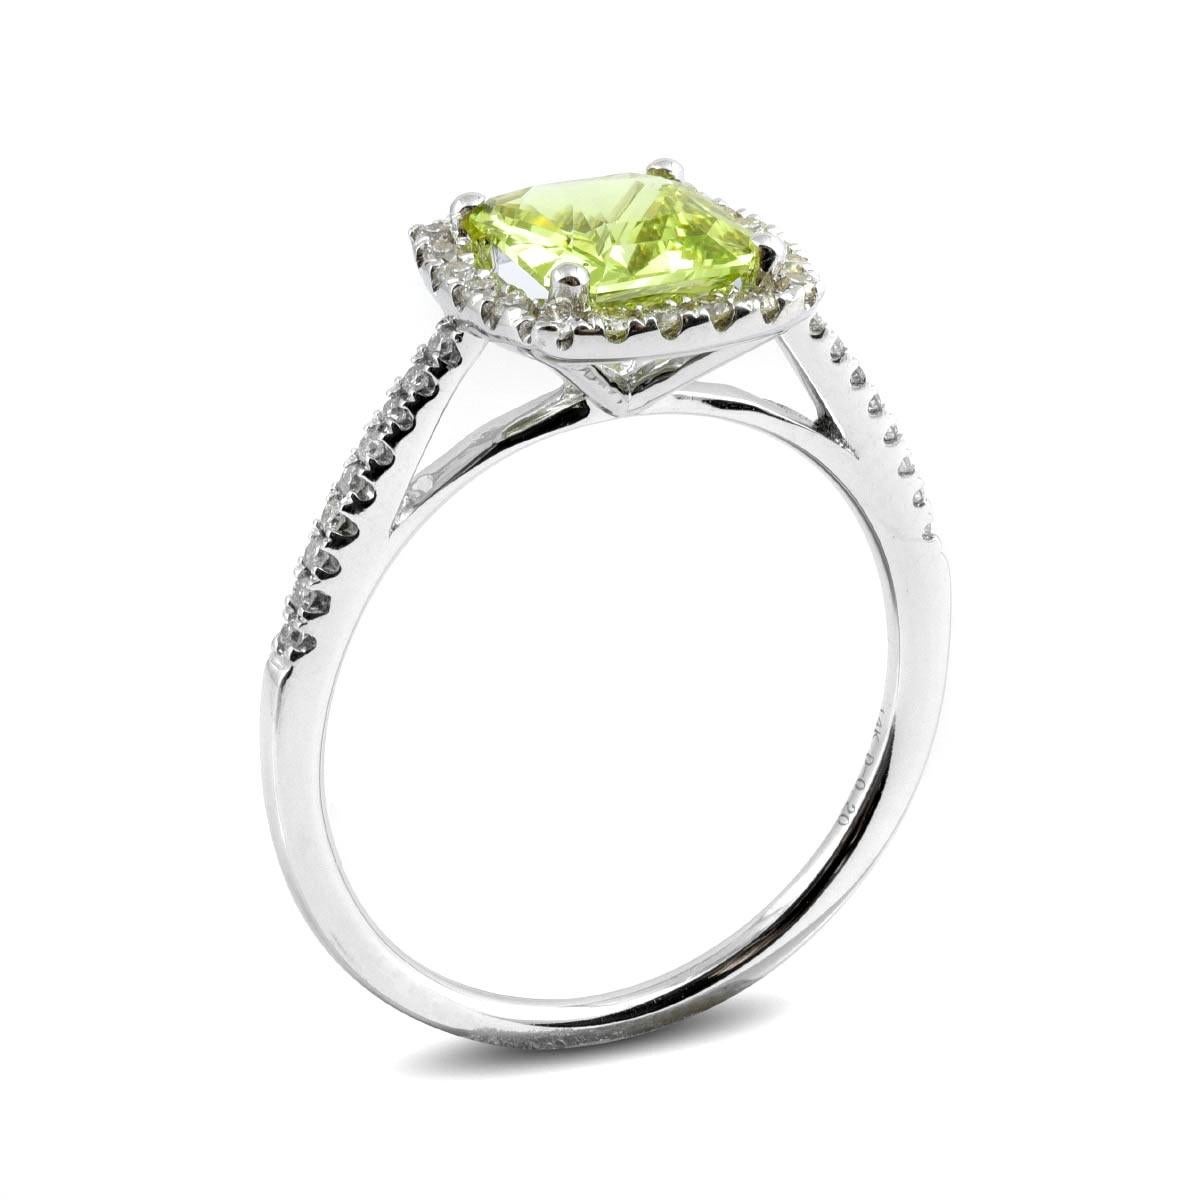 Chrysoberyls have a lustrous lemony shade that sets them apart just like this 1.33 carat gemstone with a beautiful blend of golden yellowish green. An eye clean choice, this stone will radiate light thanks to its perfect cut and strong internal